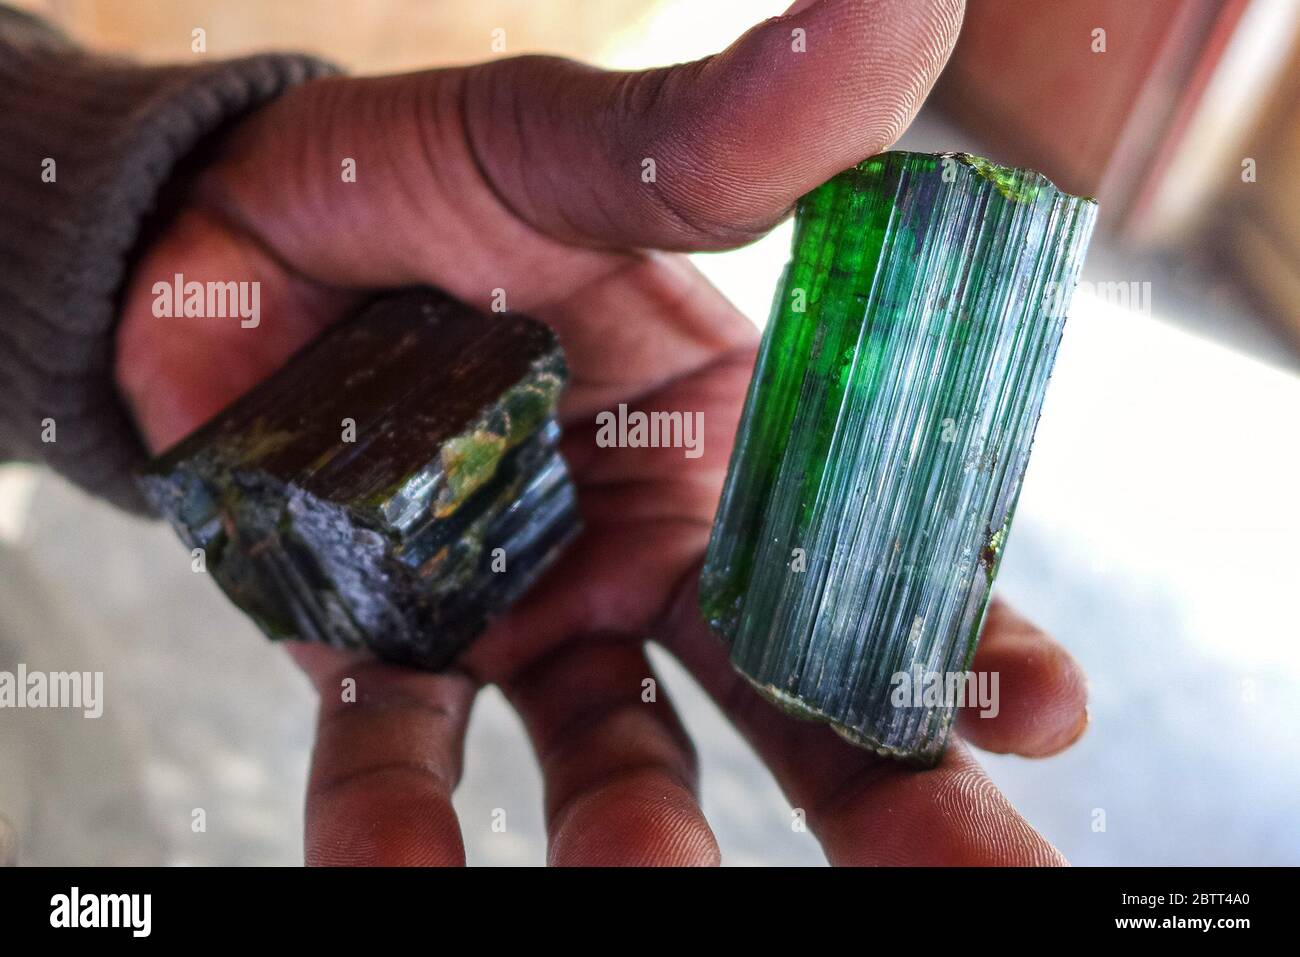 A smuggler displays tourmaline, an ore that’s highly sought by mineral traffickers. A gram can cost between $20 and $150, depending on the volume and quality of the stones. (Noella Nyirabihogo, GPJ Democratic Republic of Congo) Stock Photo